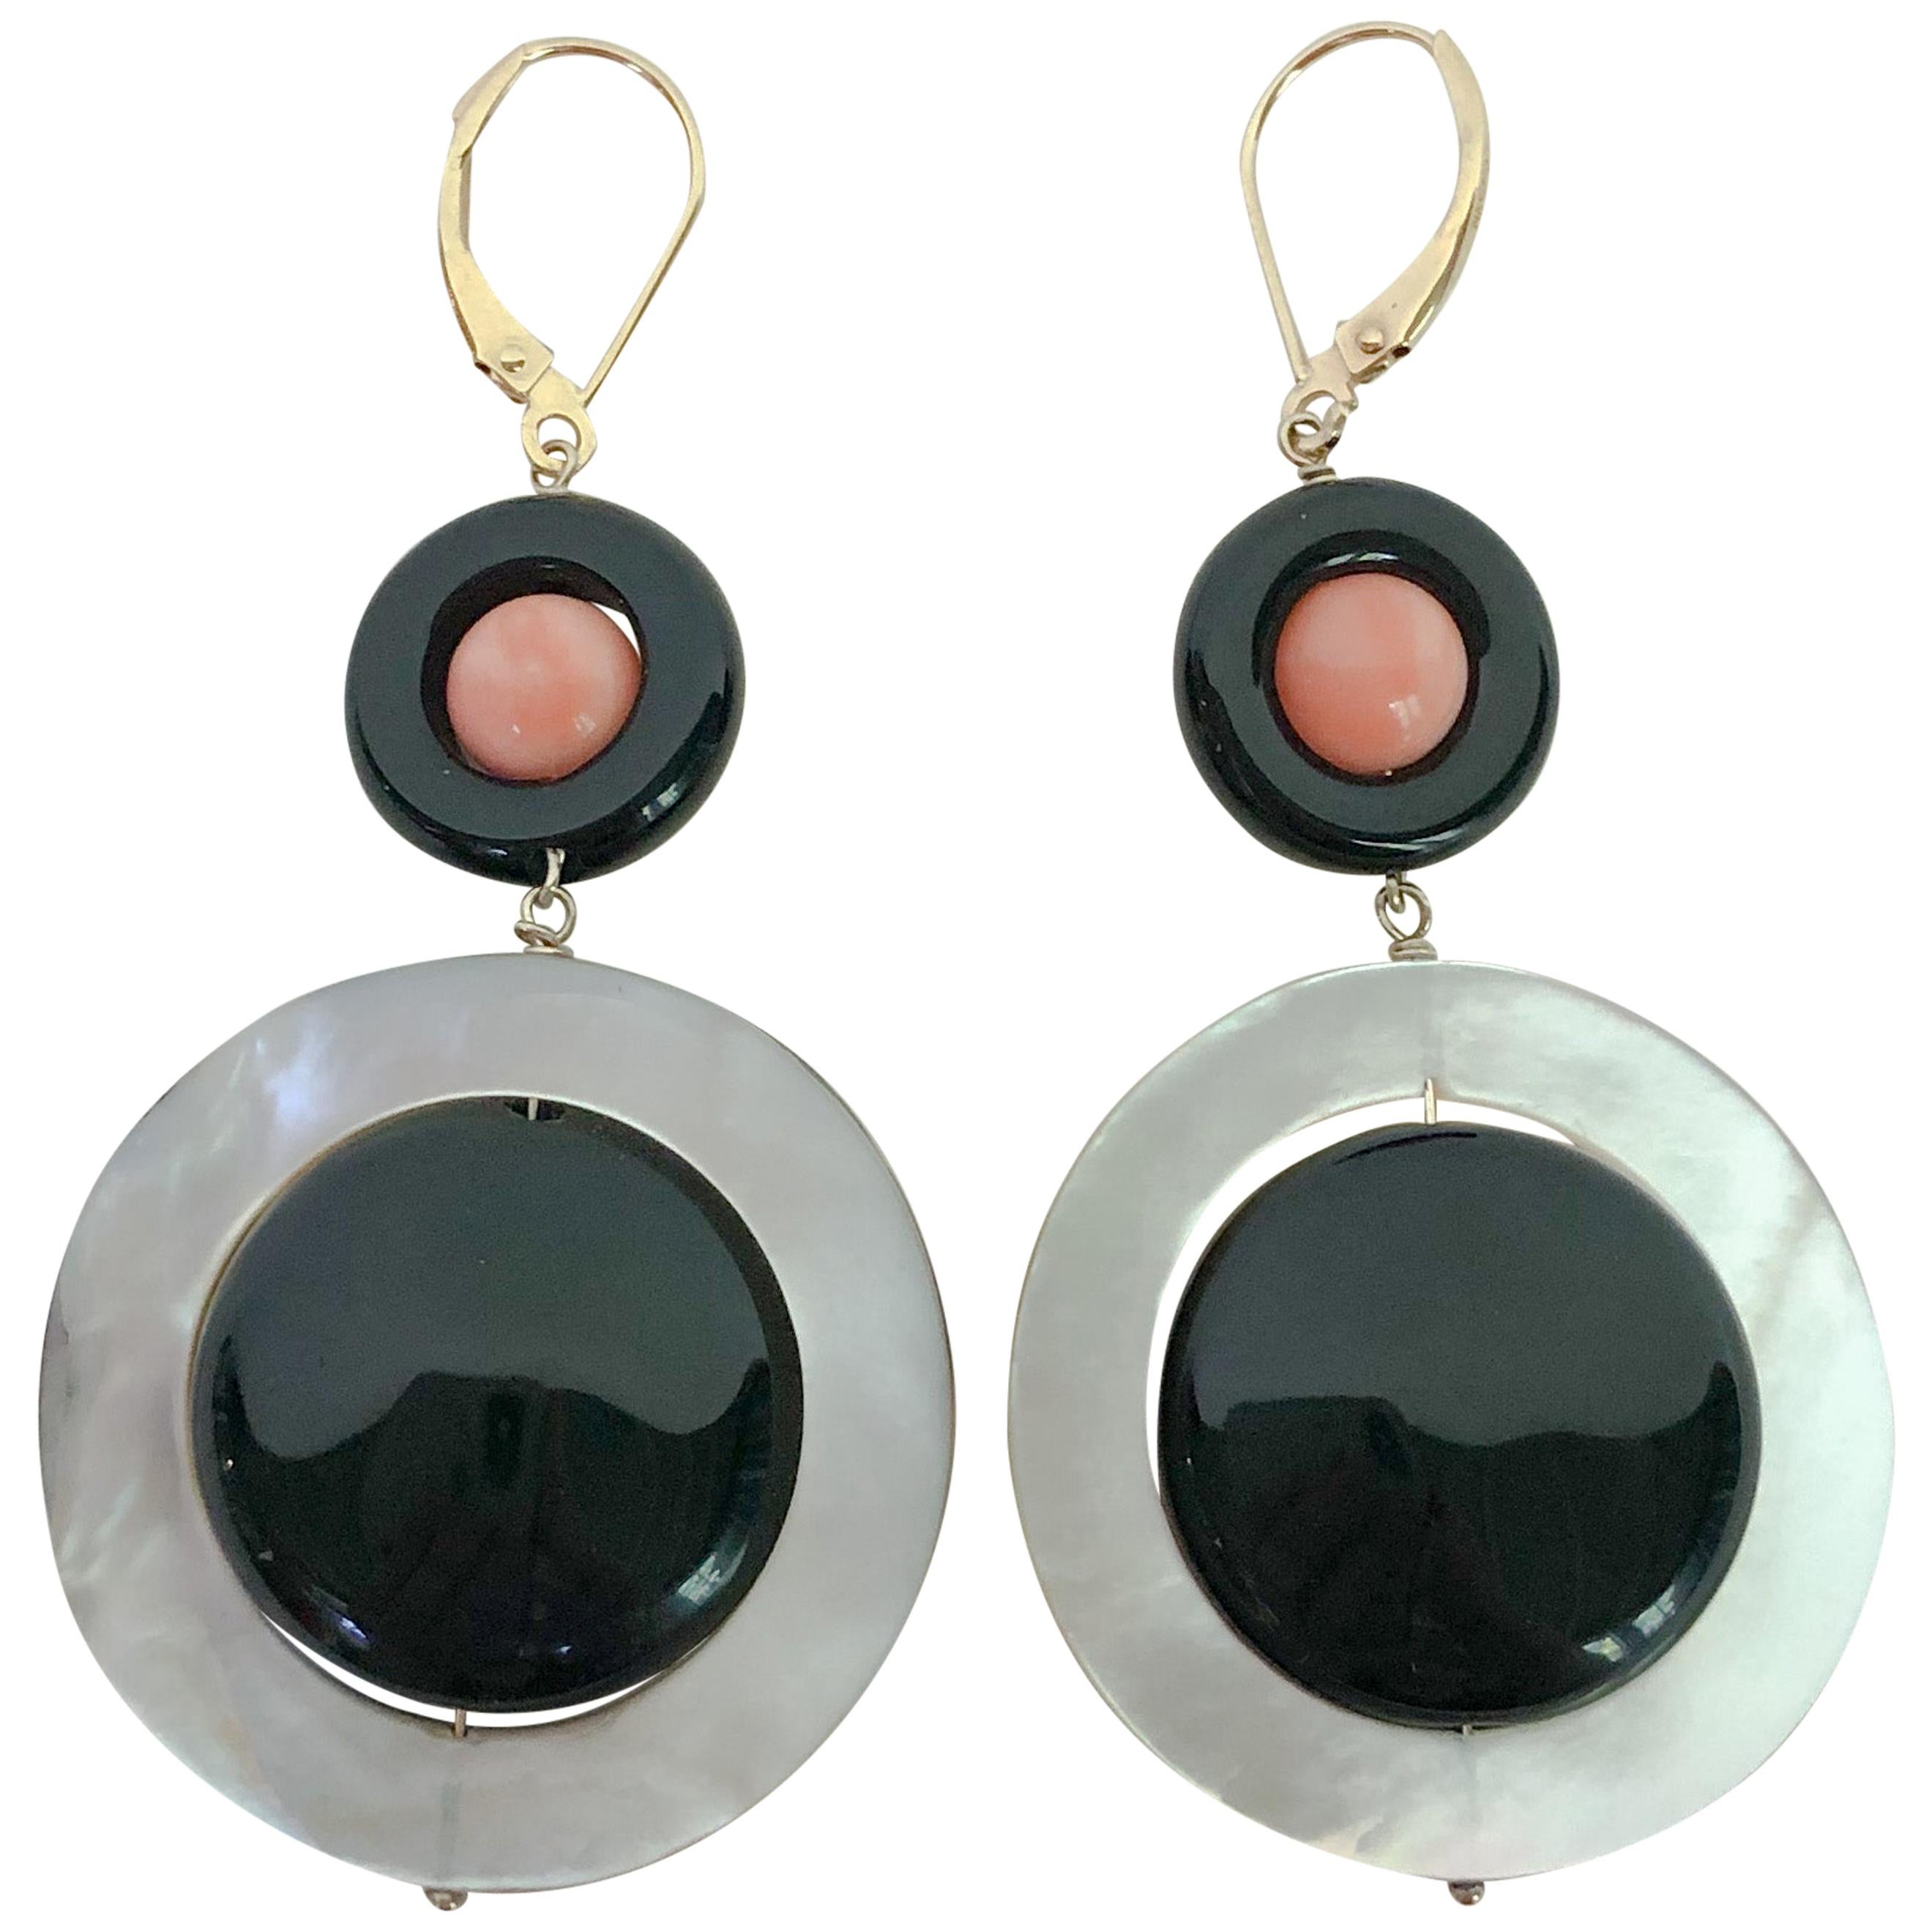 Marina J. Pink Coral, Black Onyx, Mother of Pearl Earrings with 14k Yellow Gold